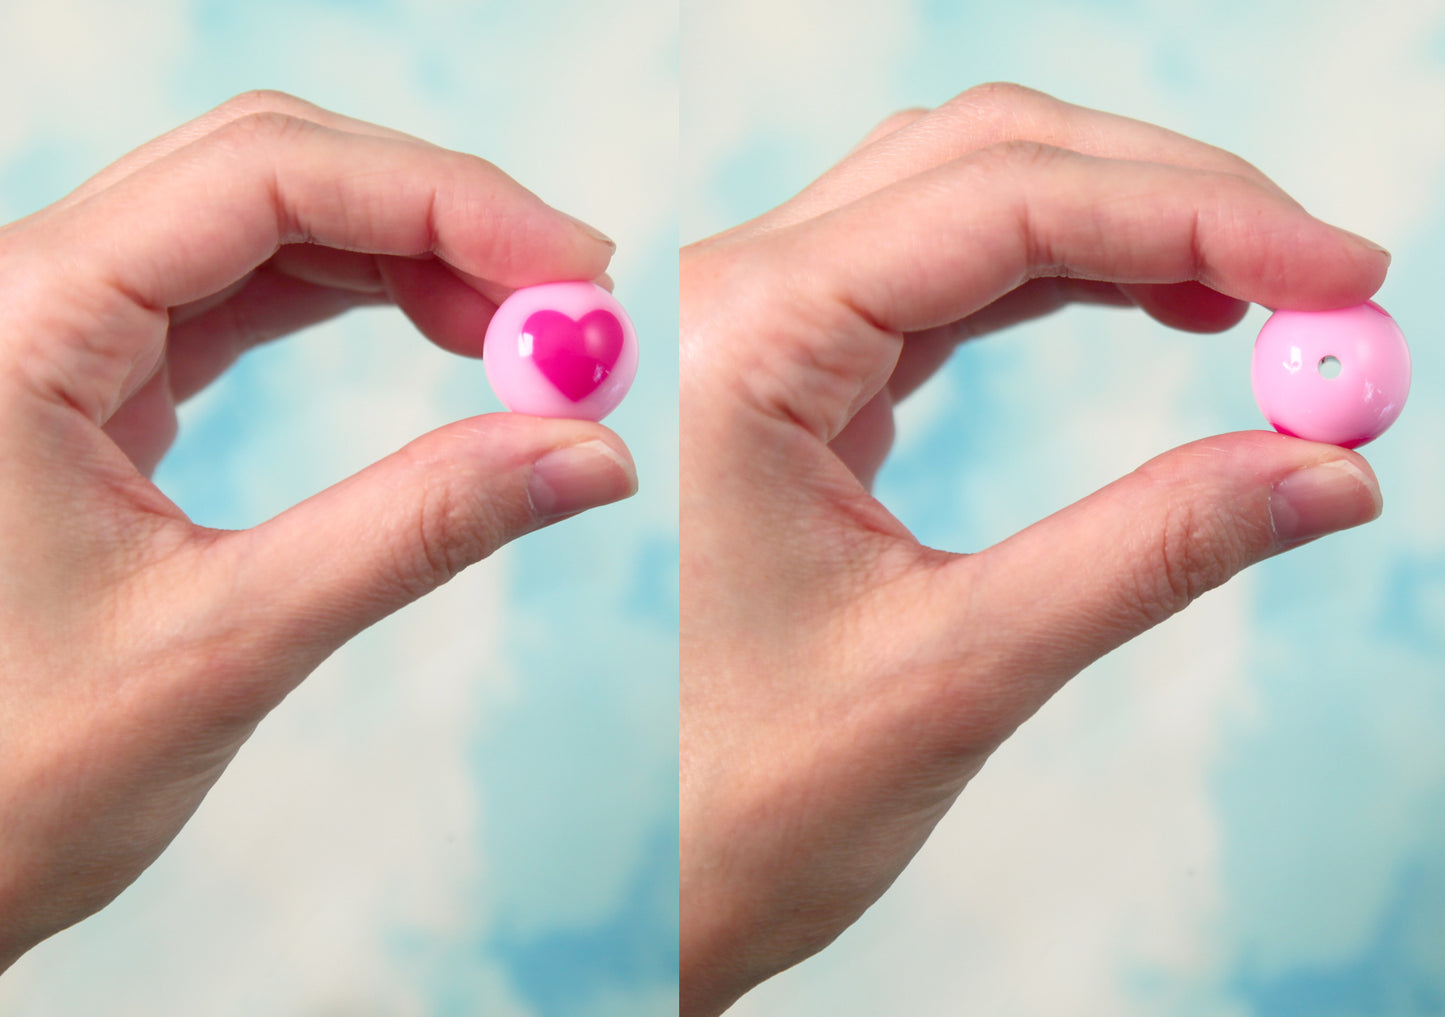 Heart Resin Beads - 20mm Cute Pink Inlaid Heart Pattern Gumball Bubblegum Resin or Acrylic Beads - 15 pcs set